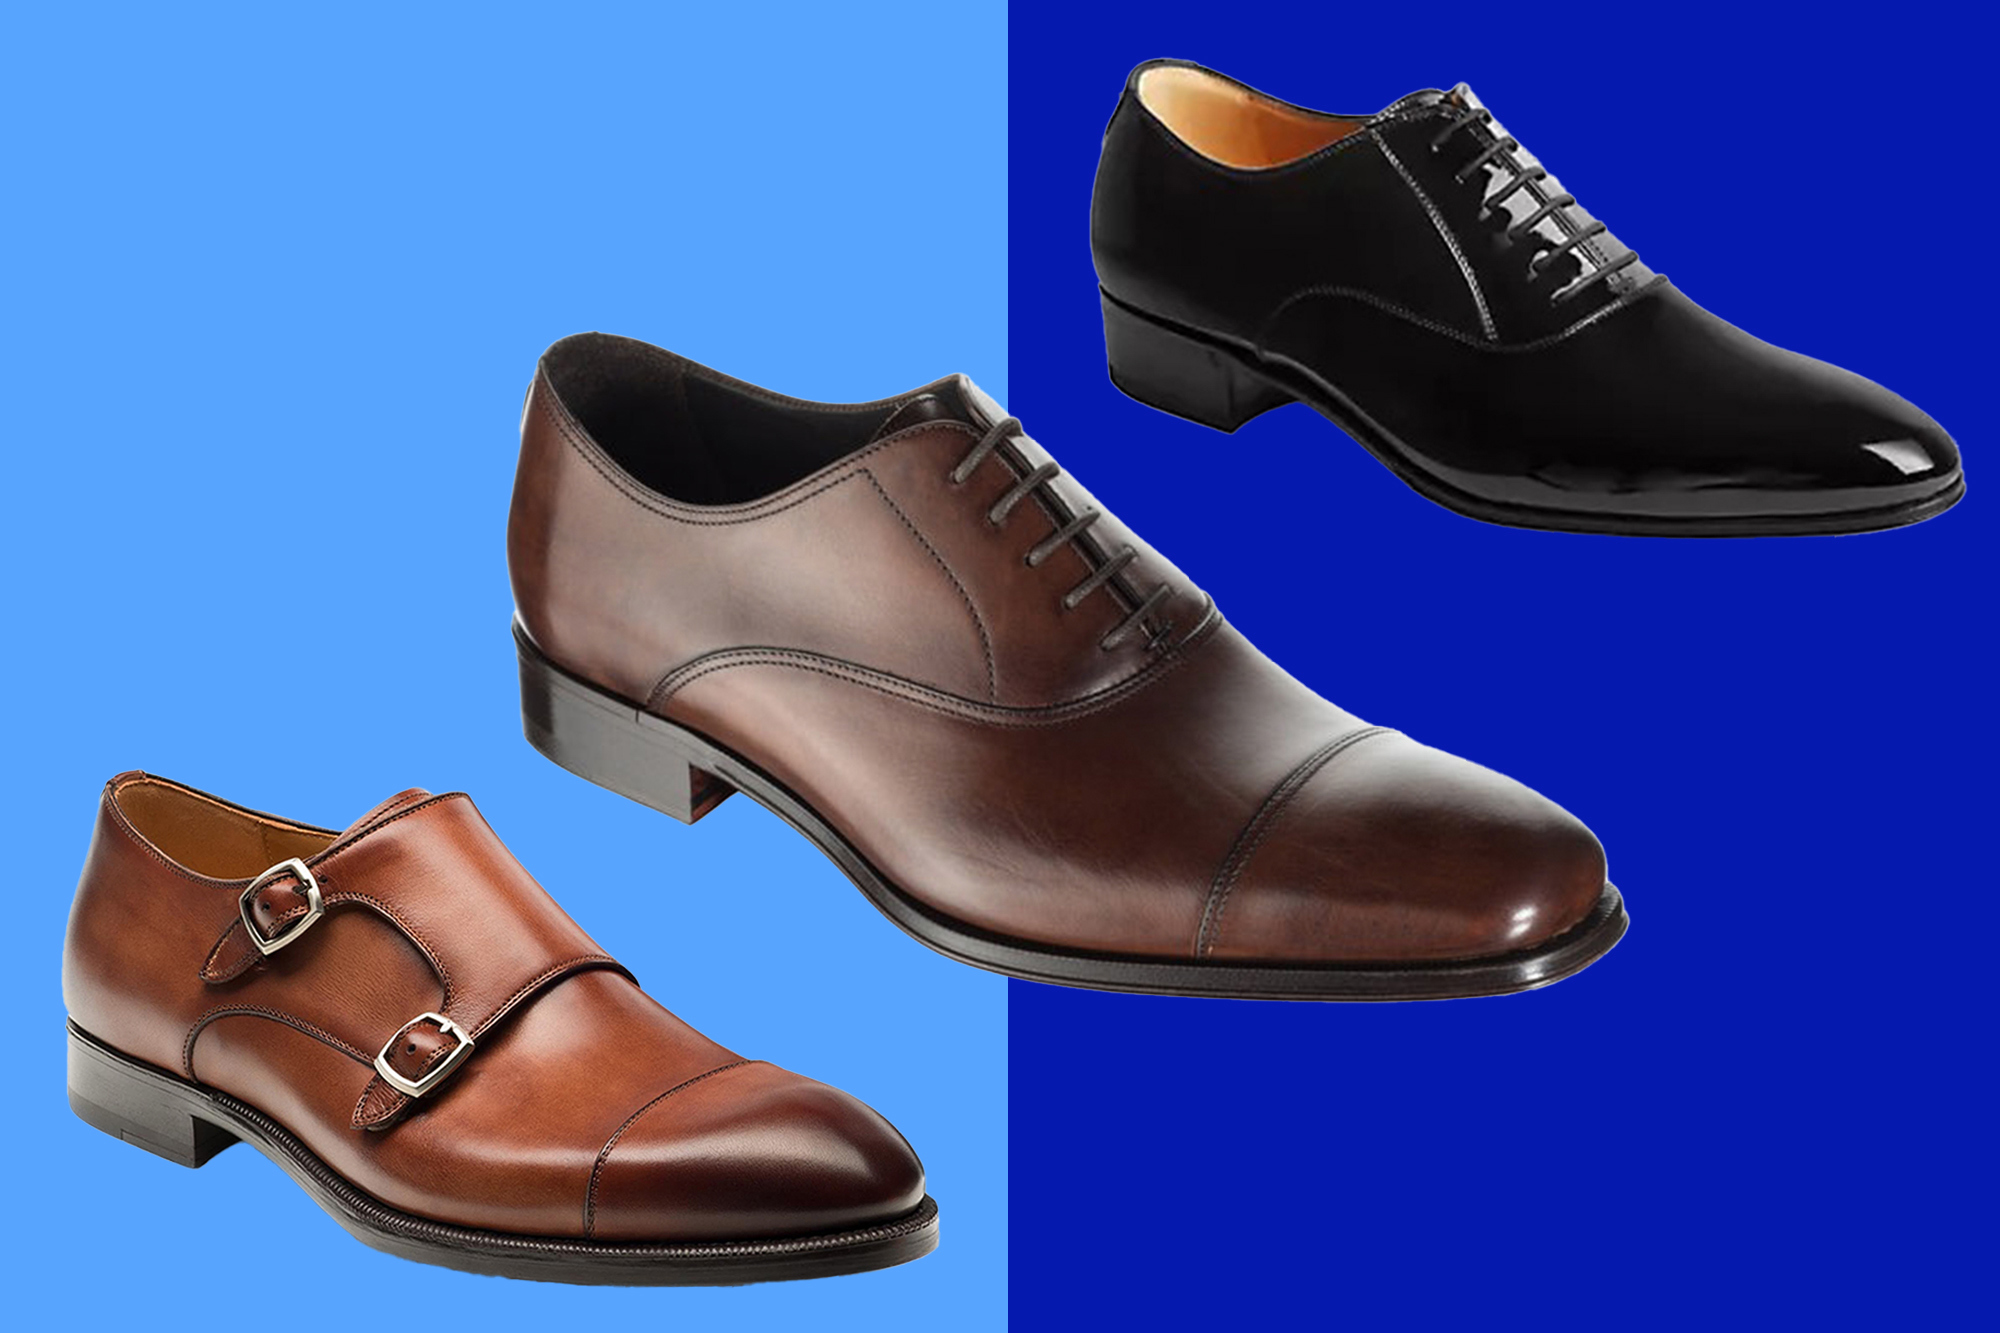 9 best men’s dress shoes to impress at every occasion, per style experts